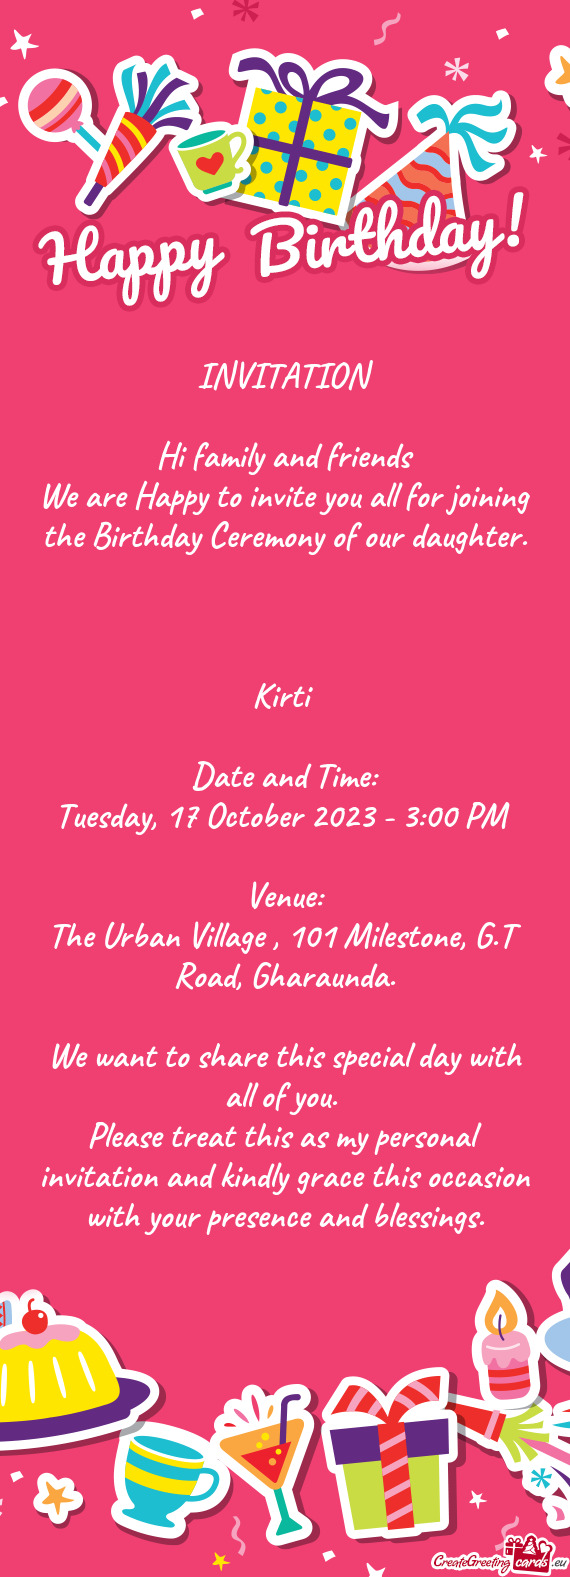 We are Happy to invite you all for joining the Birthday Ceremony of our daughter